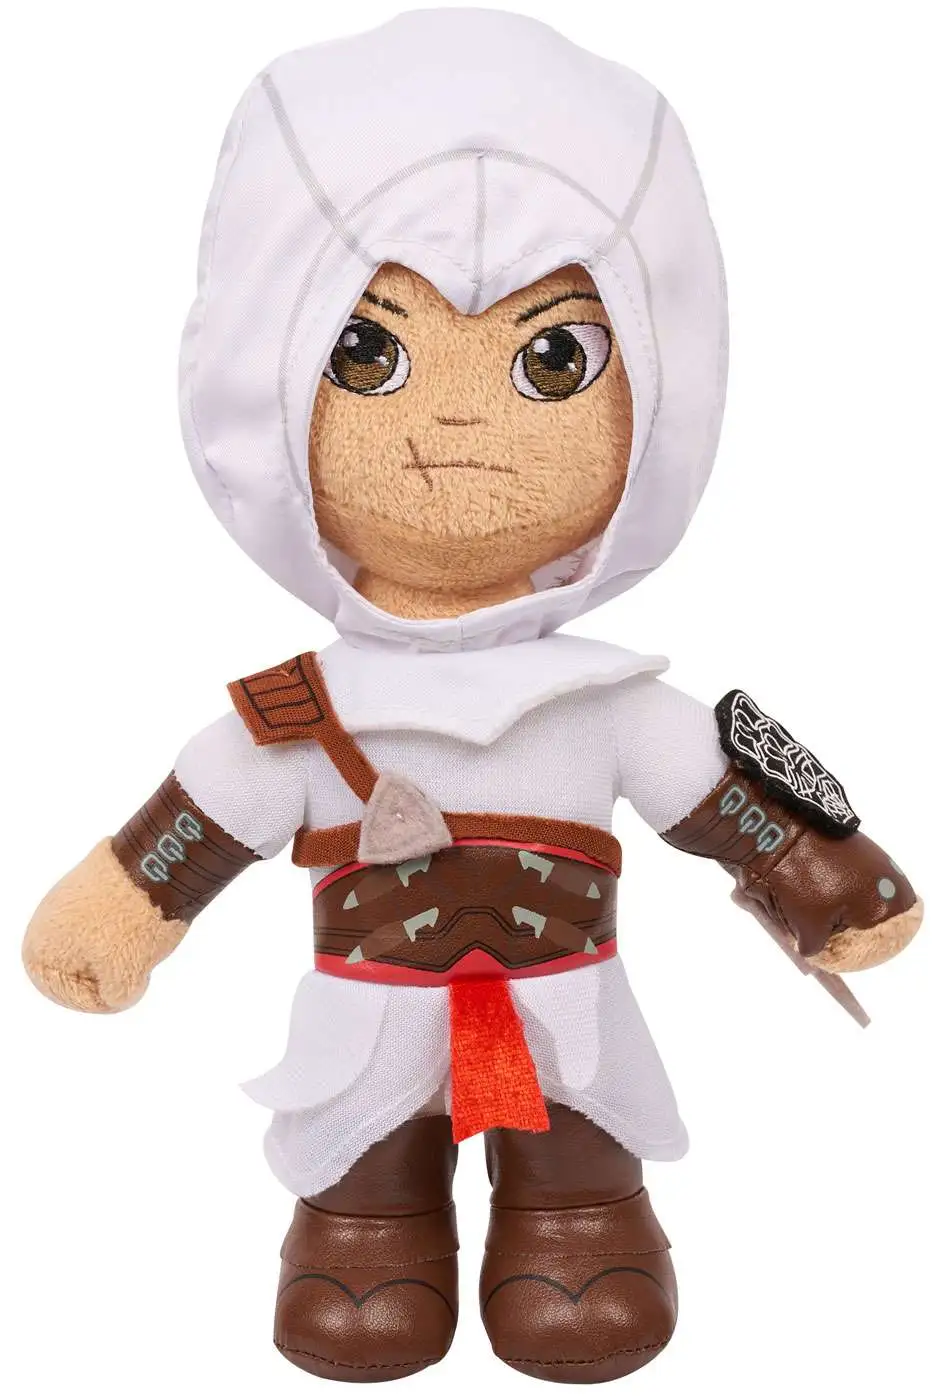 Assassin's Creed Revelations Plush Suffed Toy Character Figure From Video Game 